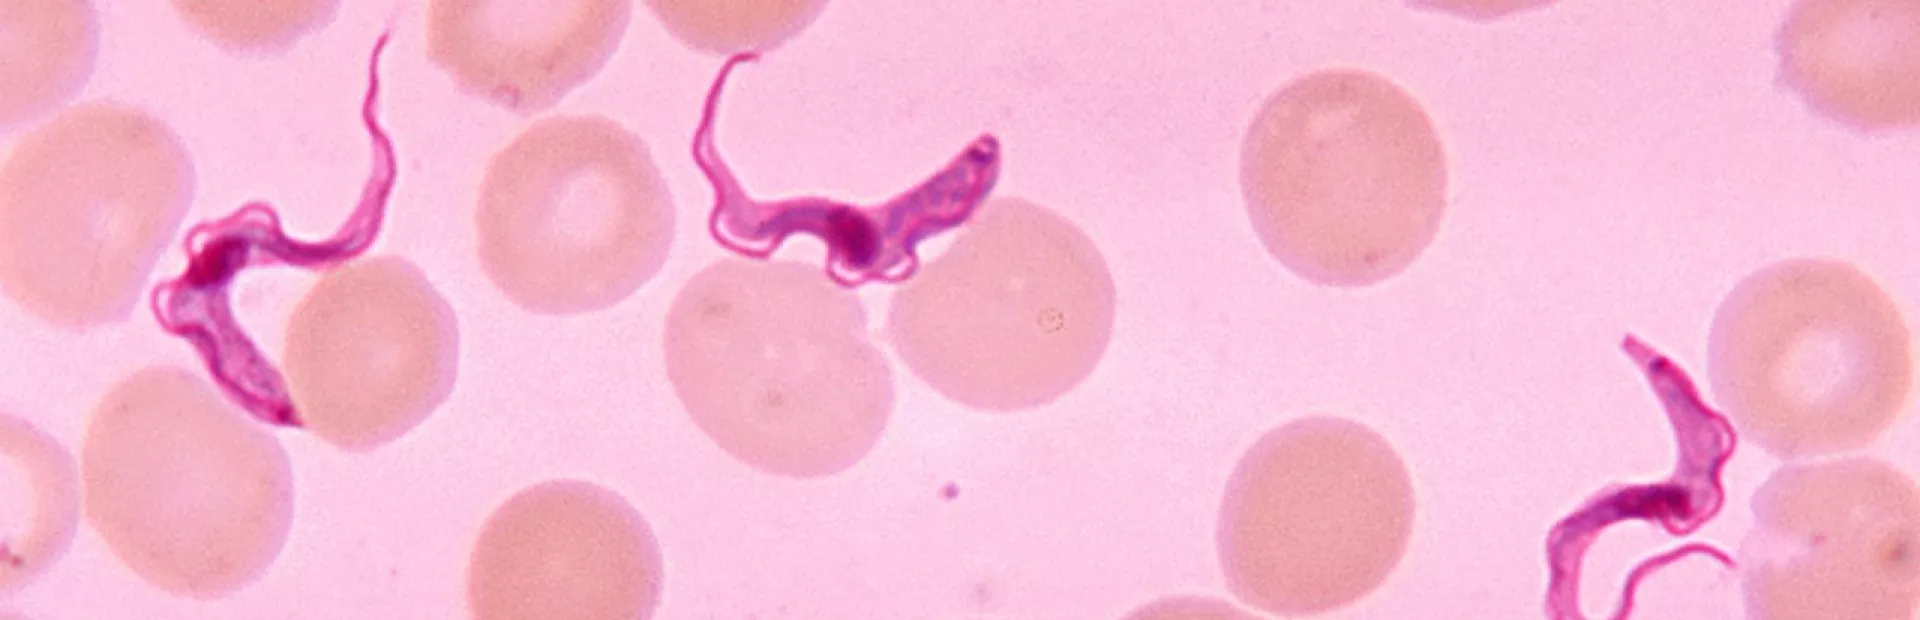 Blood smear from patient with African Sleeping sickness (Centers for Disease Control and Prevention)